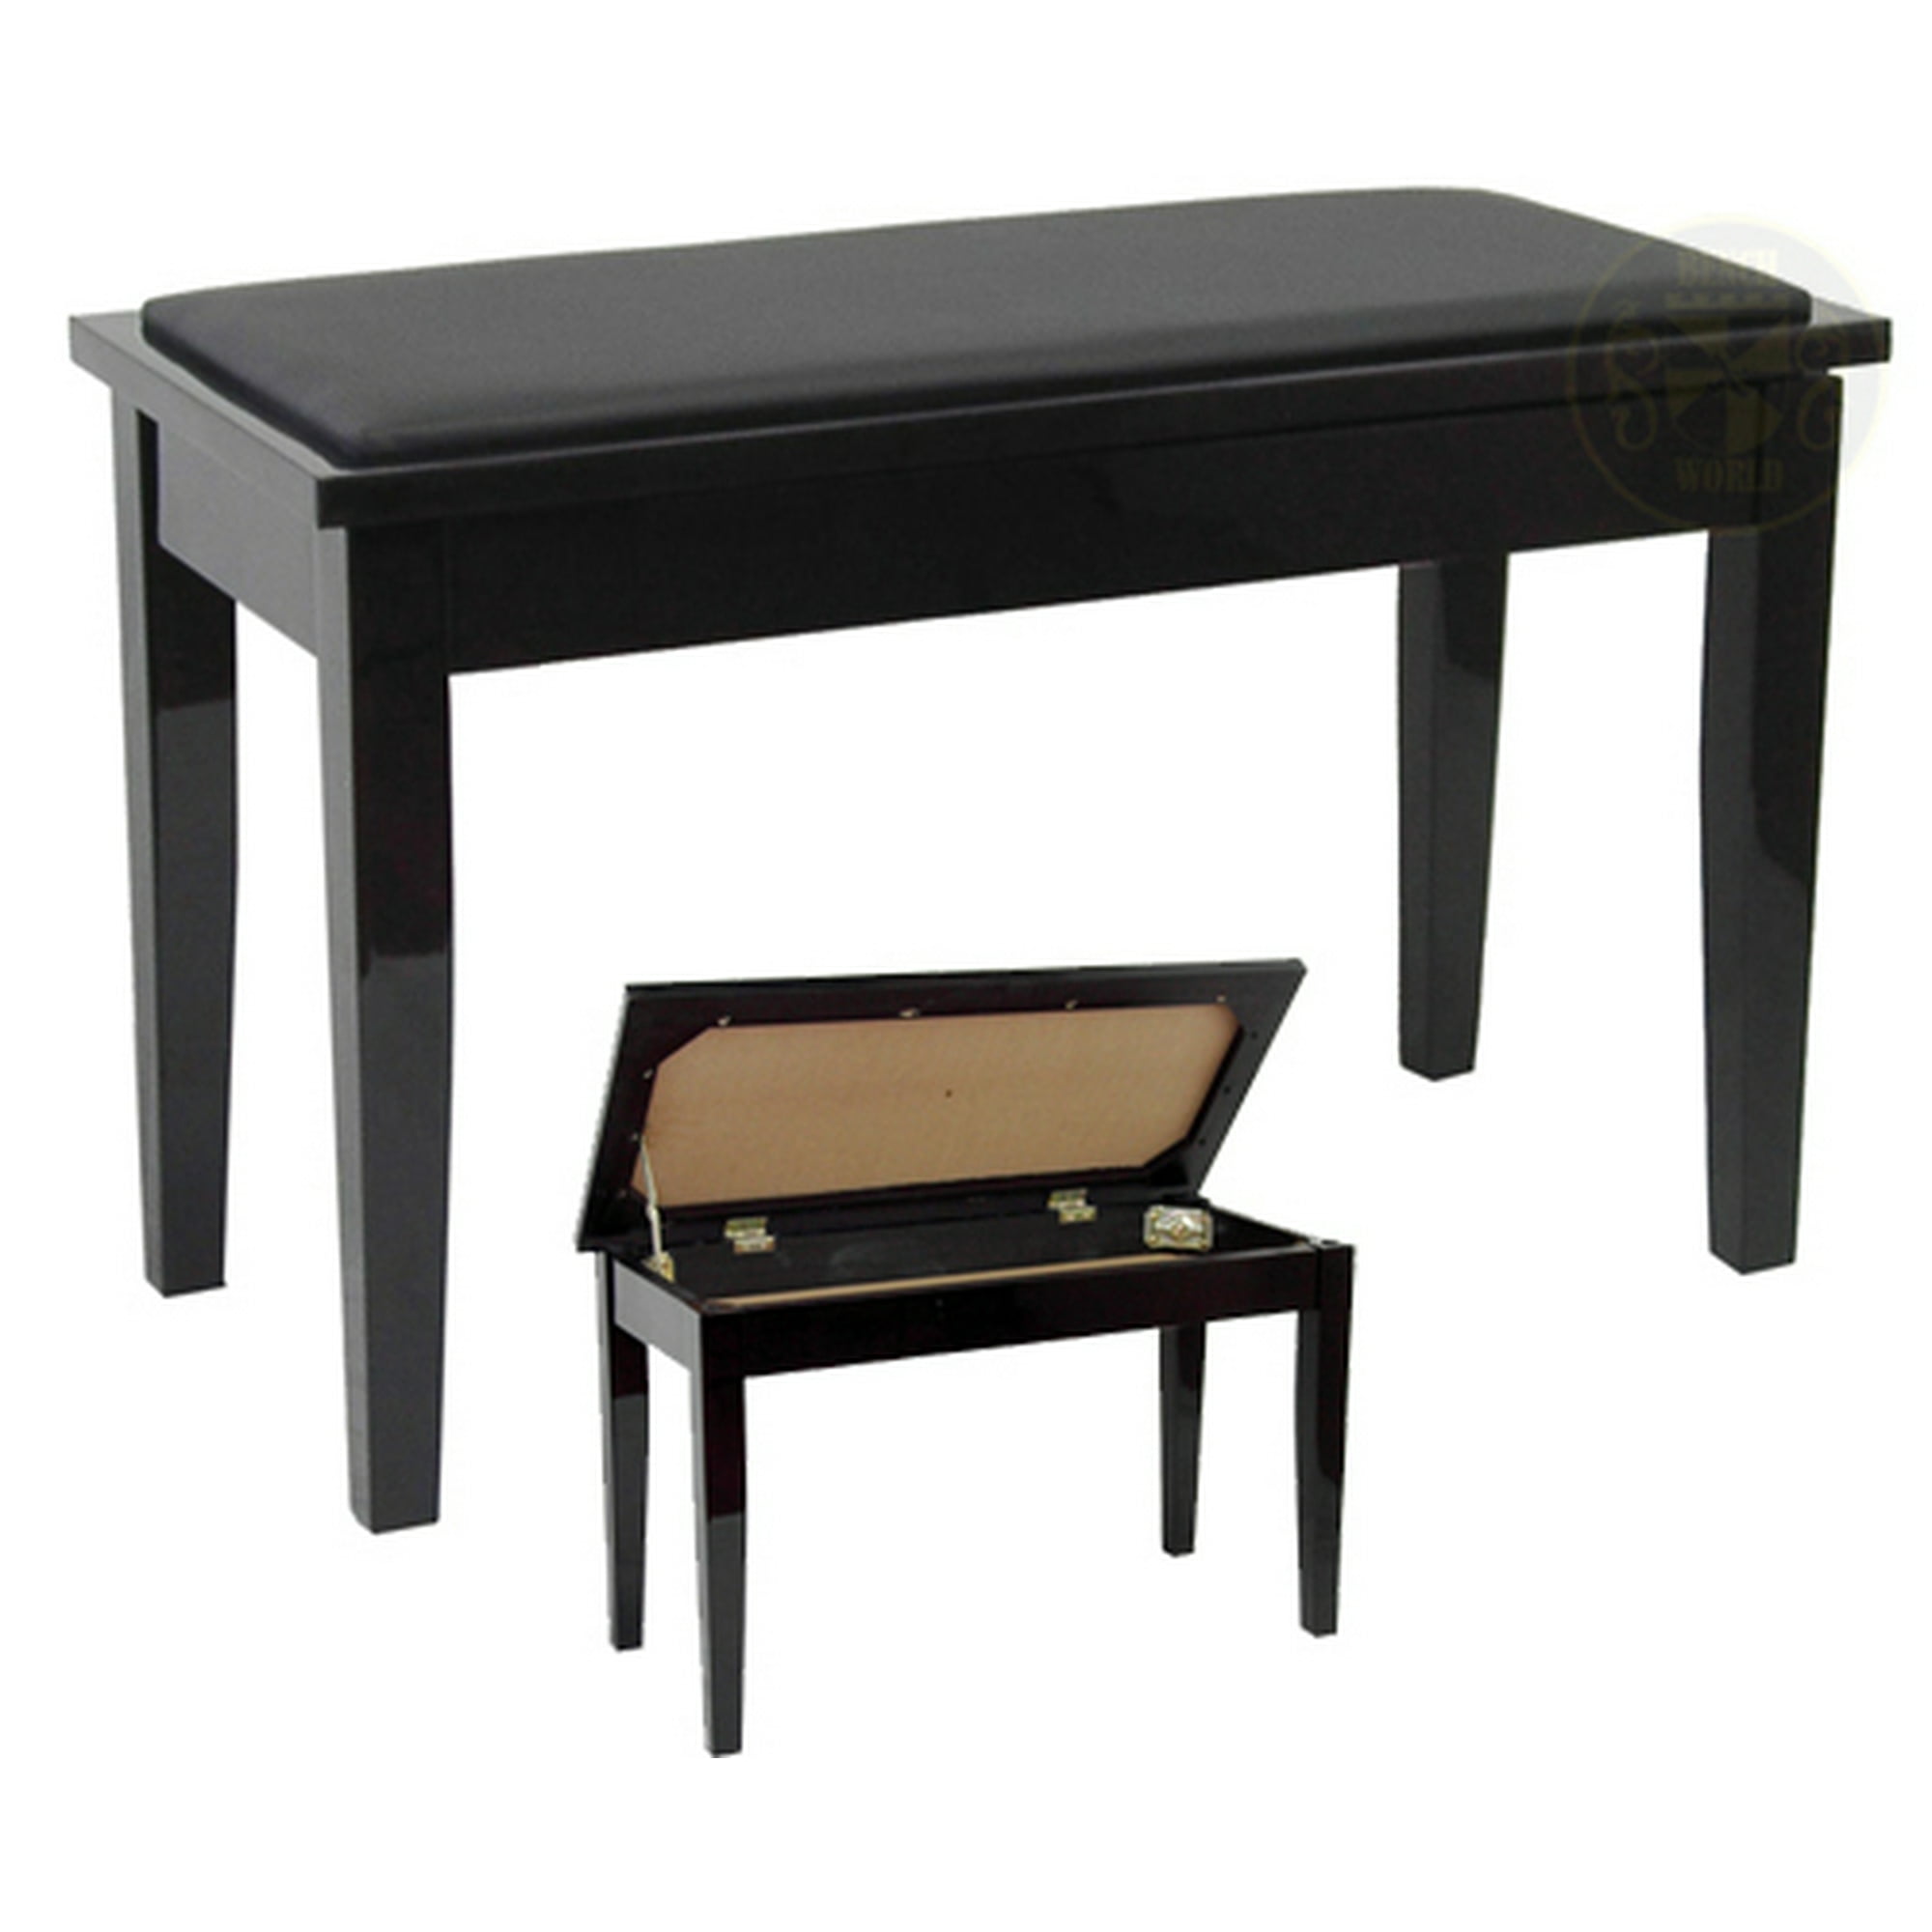 Benchworld Ace202cpe Duet Piano Bench, Piano Bench With Storage Canada